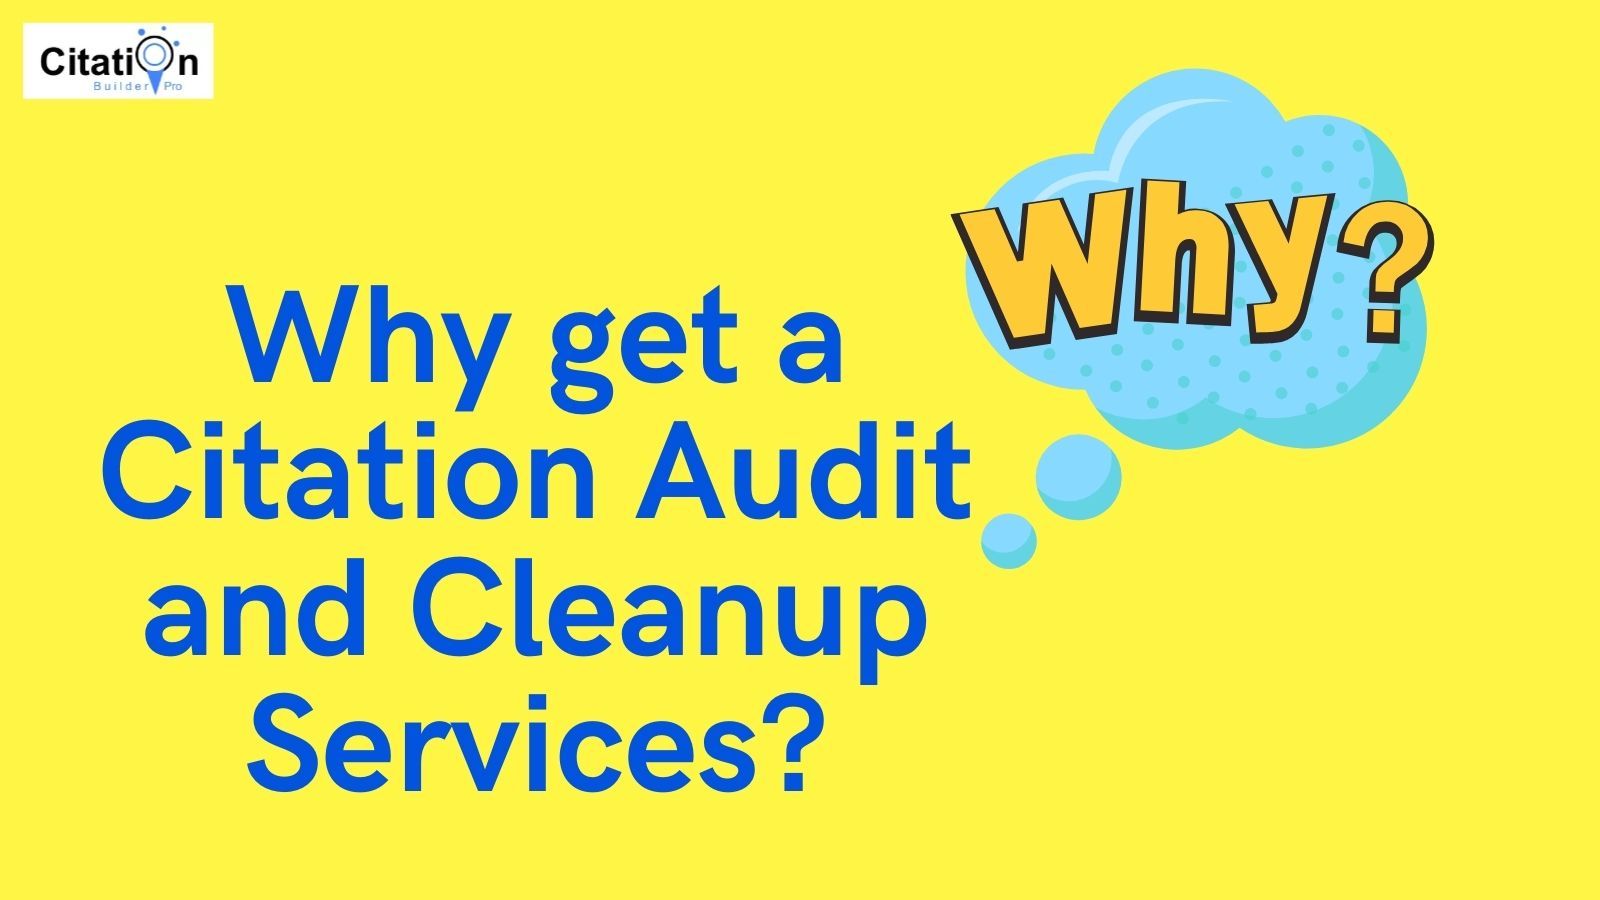 Why get a citation audit and cleanup services